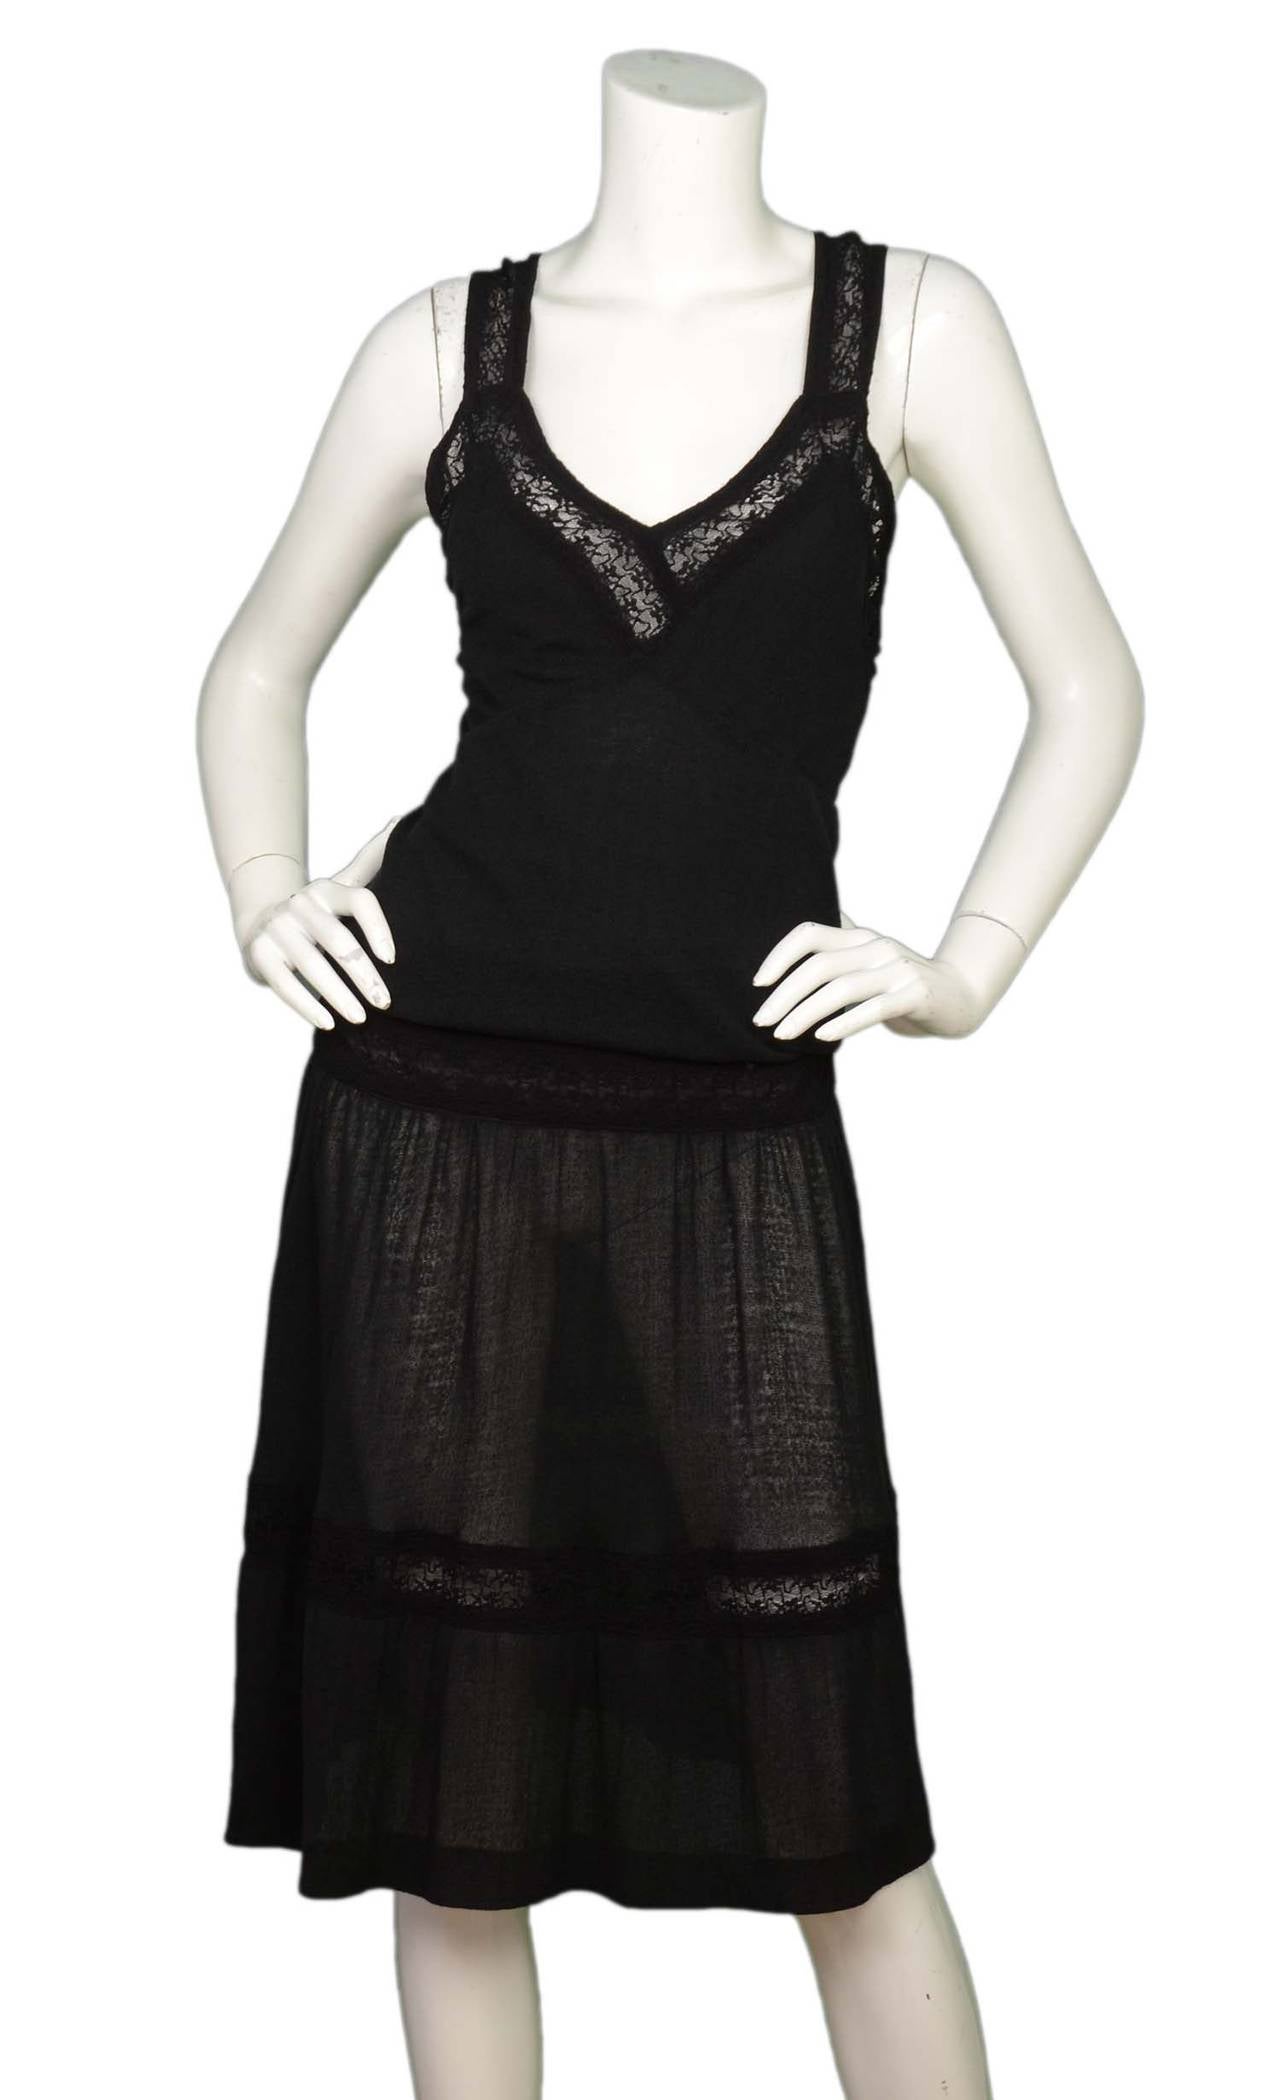 Chanel '05 Black Lace Crochet Dress w/Crisscross Back
Features versatile straps w/button closures to create crisscross or normal straps

    Made in: France
    Year of Production: 2005
    Color: Black
    Composition: 74% cotton, 26% nylon
